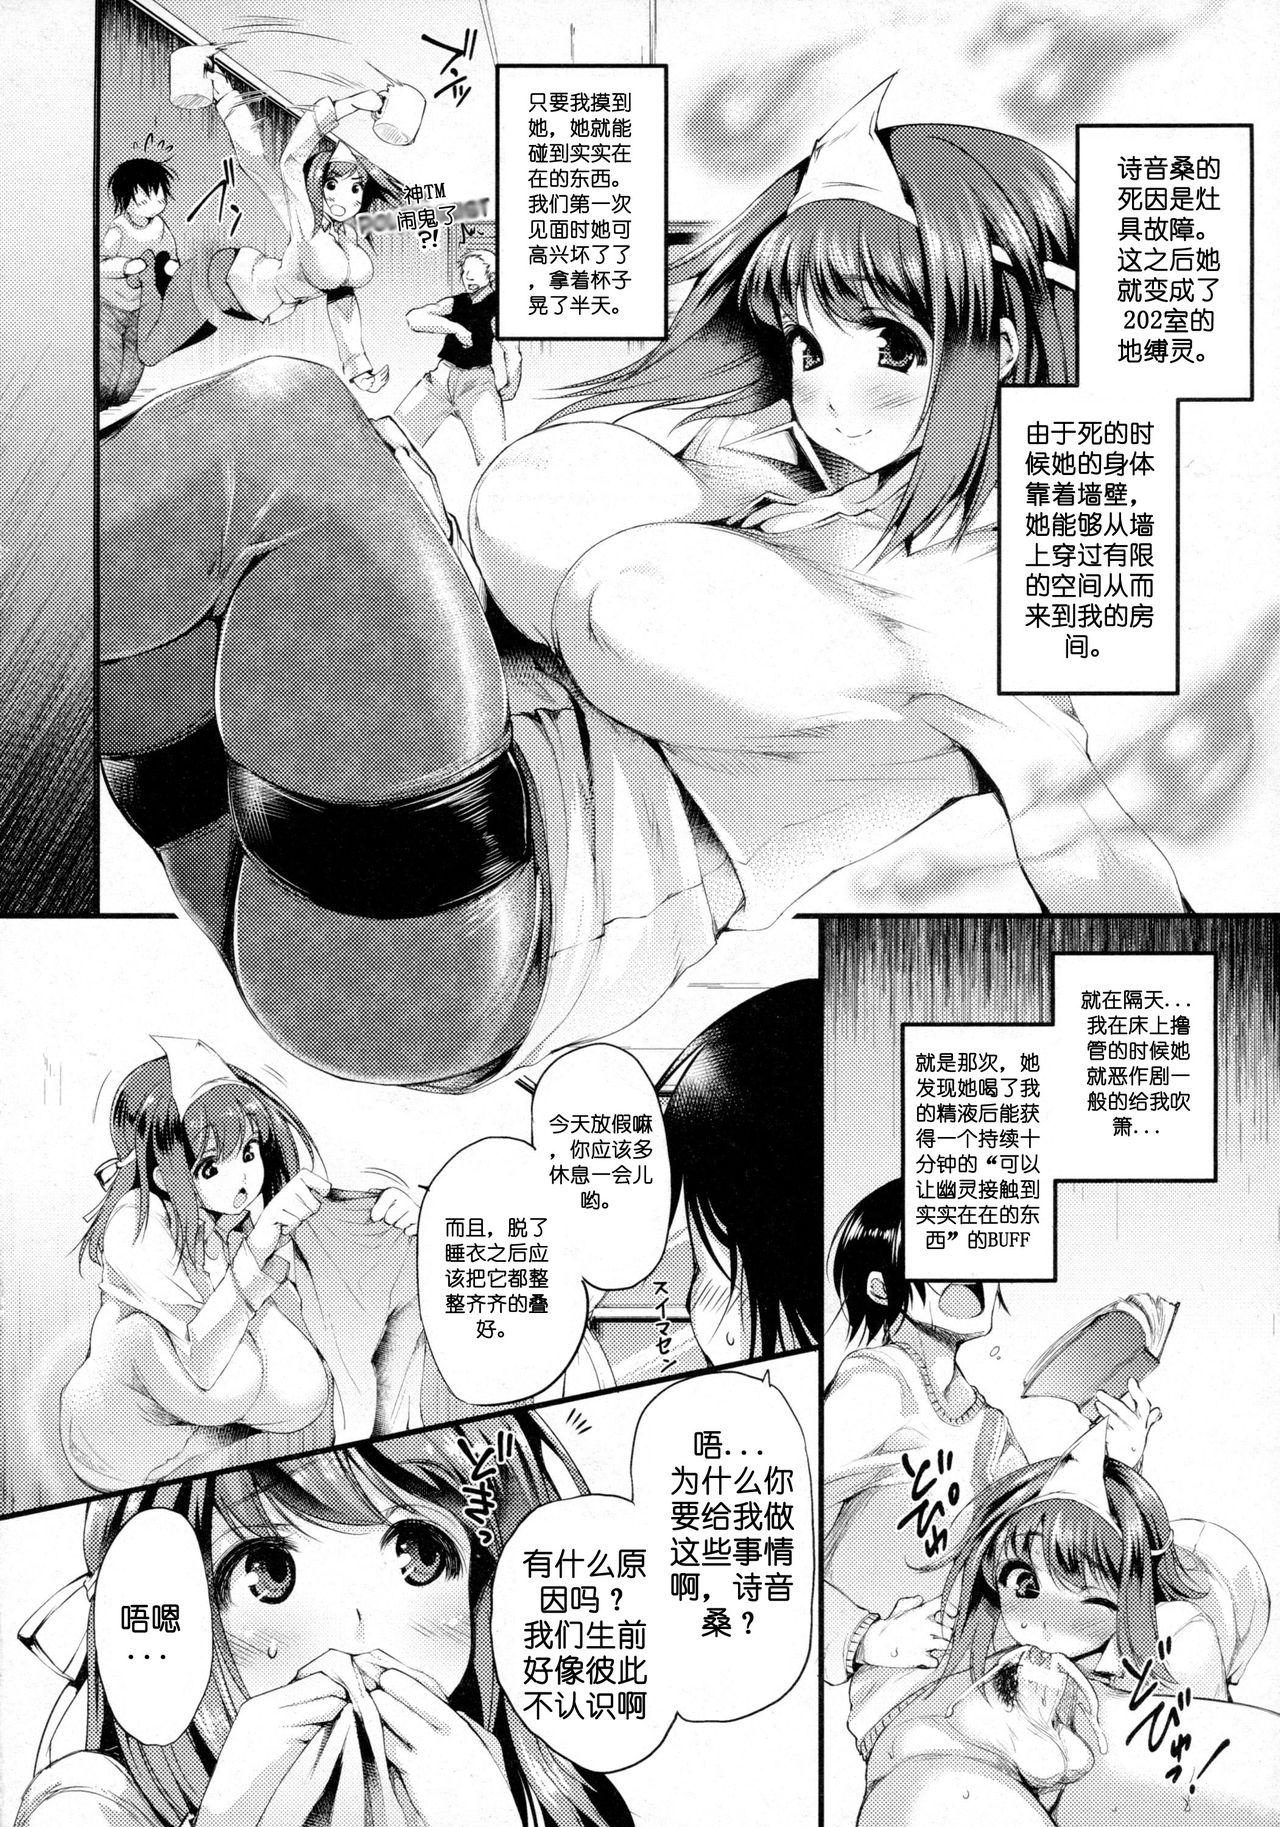 Casal [Oohira Sunset] 202-Goushitsu no Yuurei-san | The Ghost in Room 202 (COMIC Unreal 2016-02 Vol. 59) [Chinese] [简称天子个人汉化] (Ongoing) Piss - Page 2